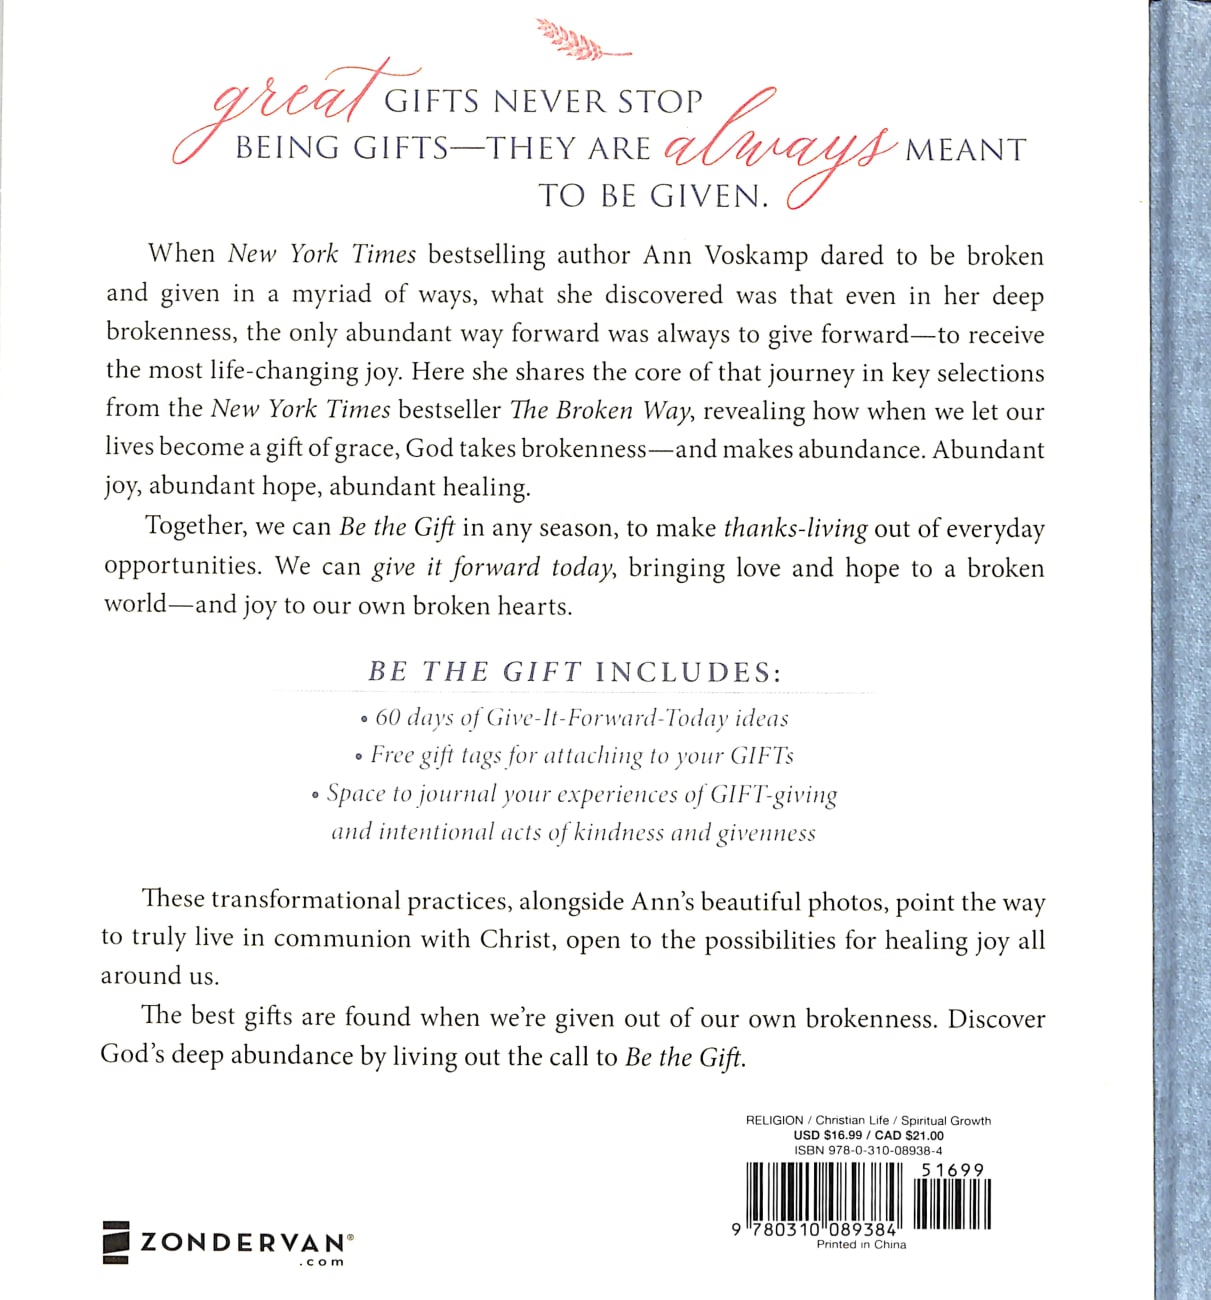 Be the Gift: Let Your Brokenness Be Turned Into Abundance Hardback